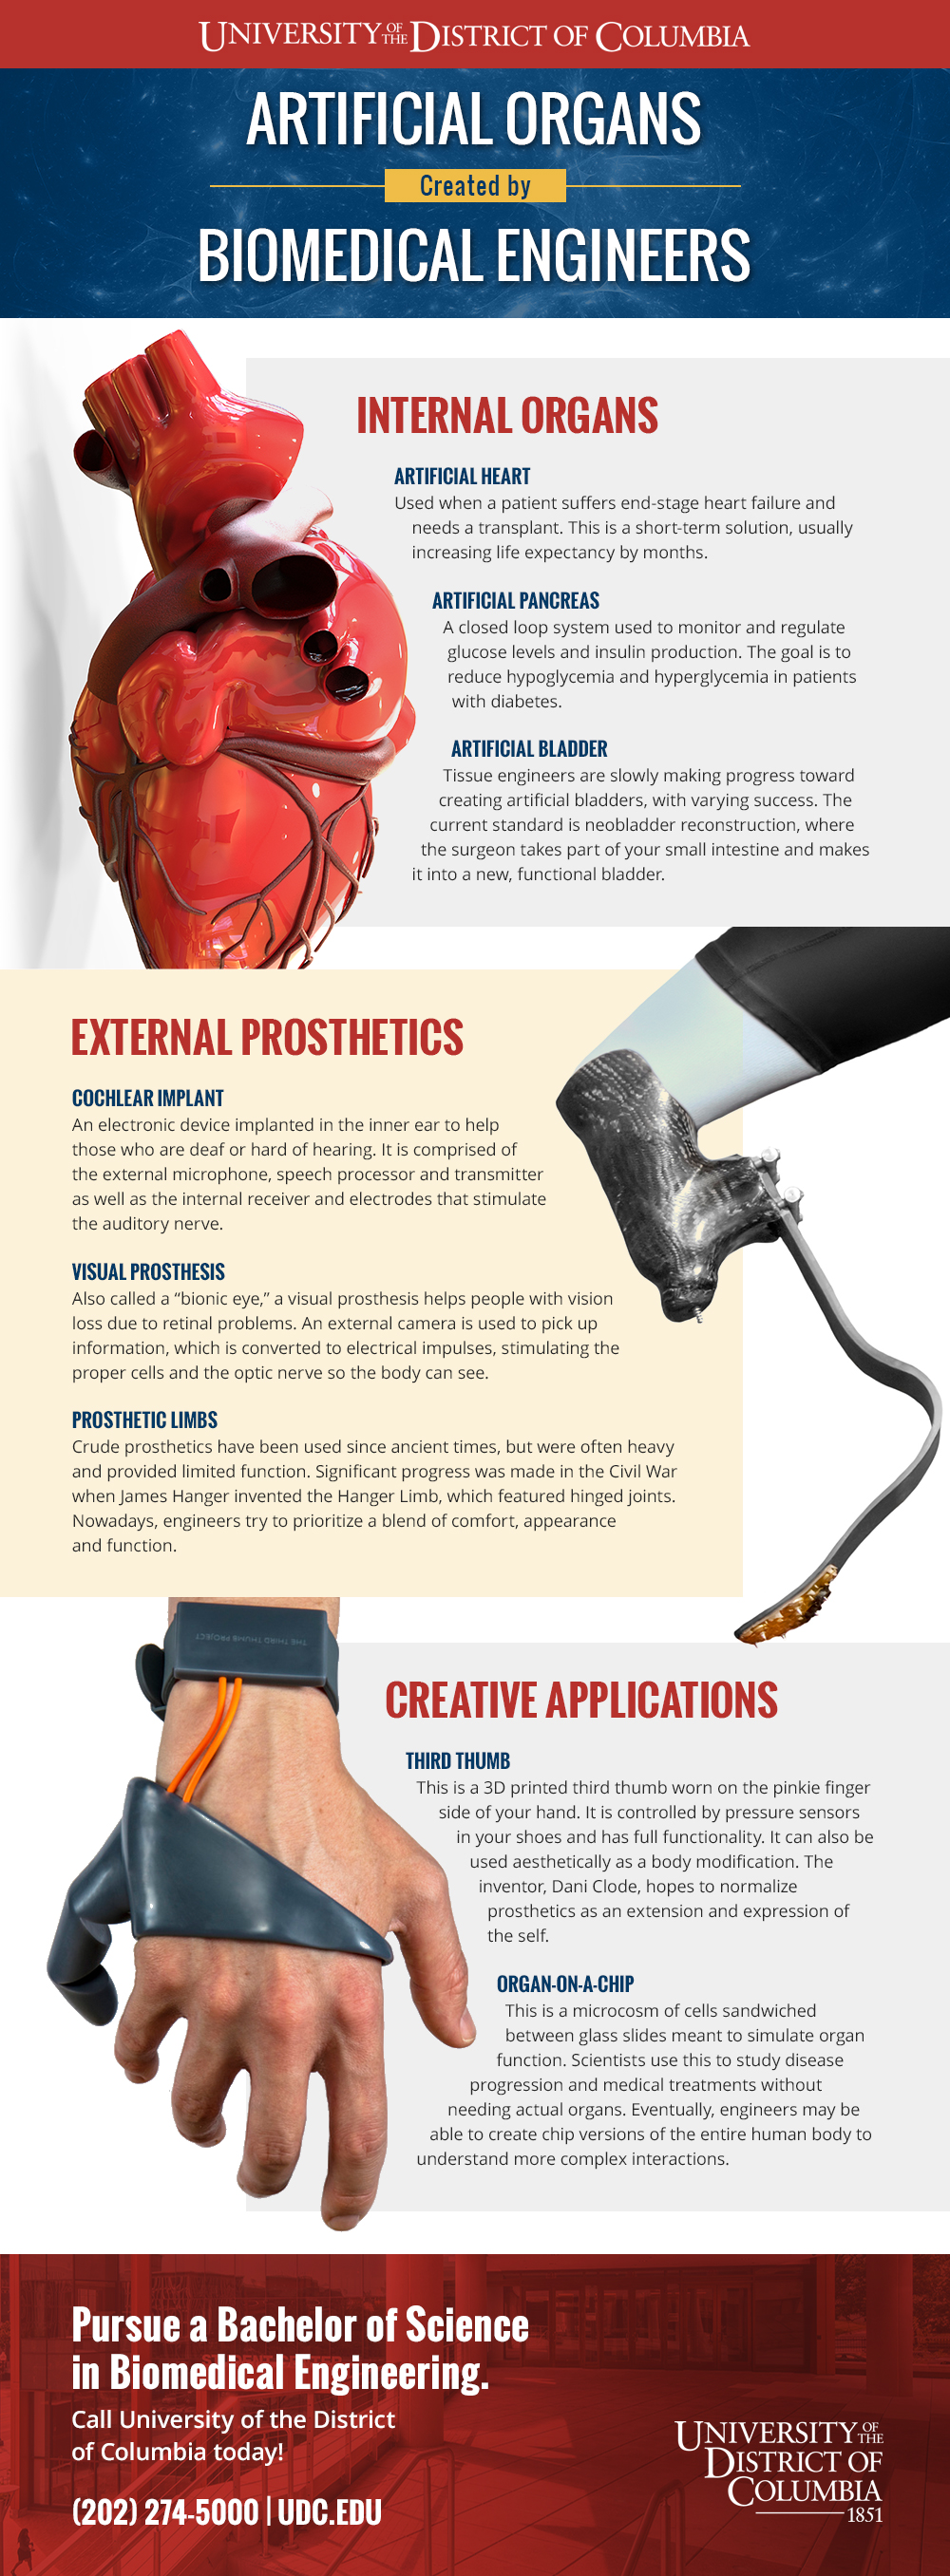 University of the District of Columbia - Infographic - Artificial Organs